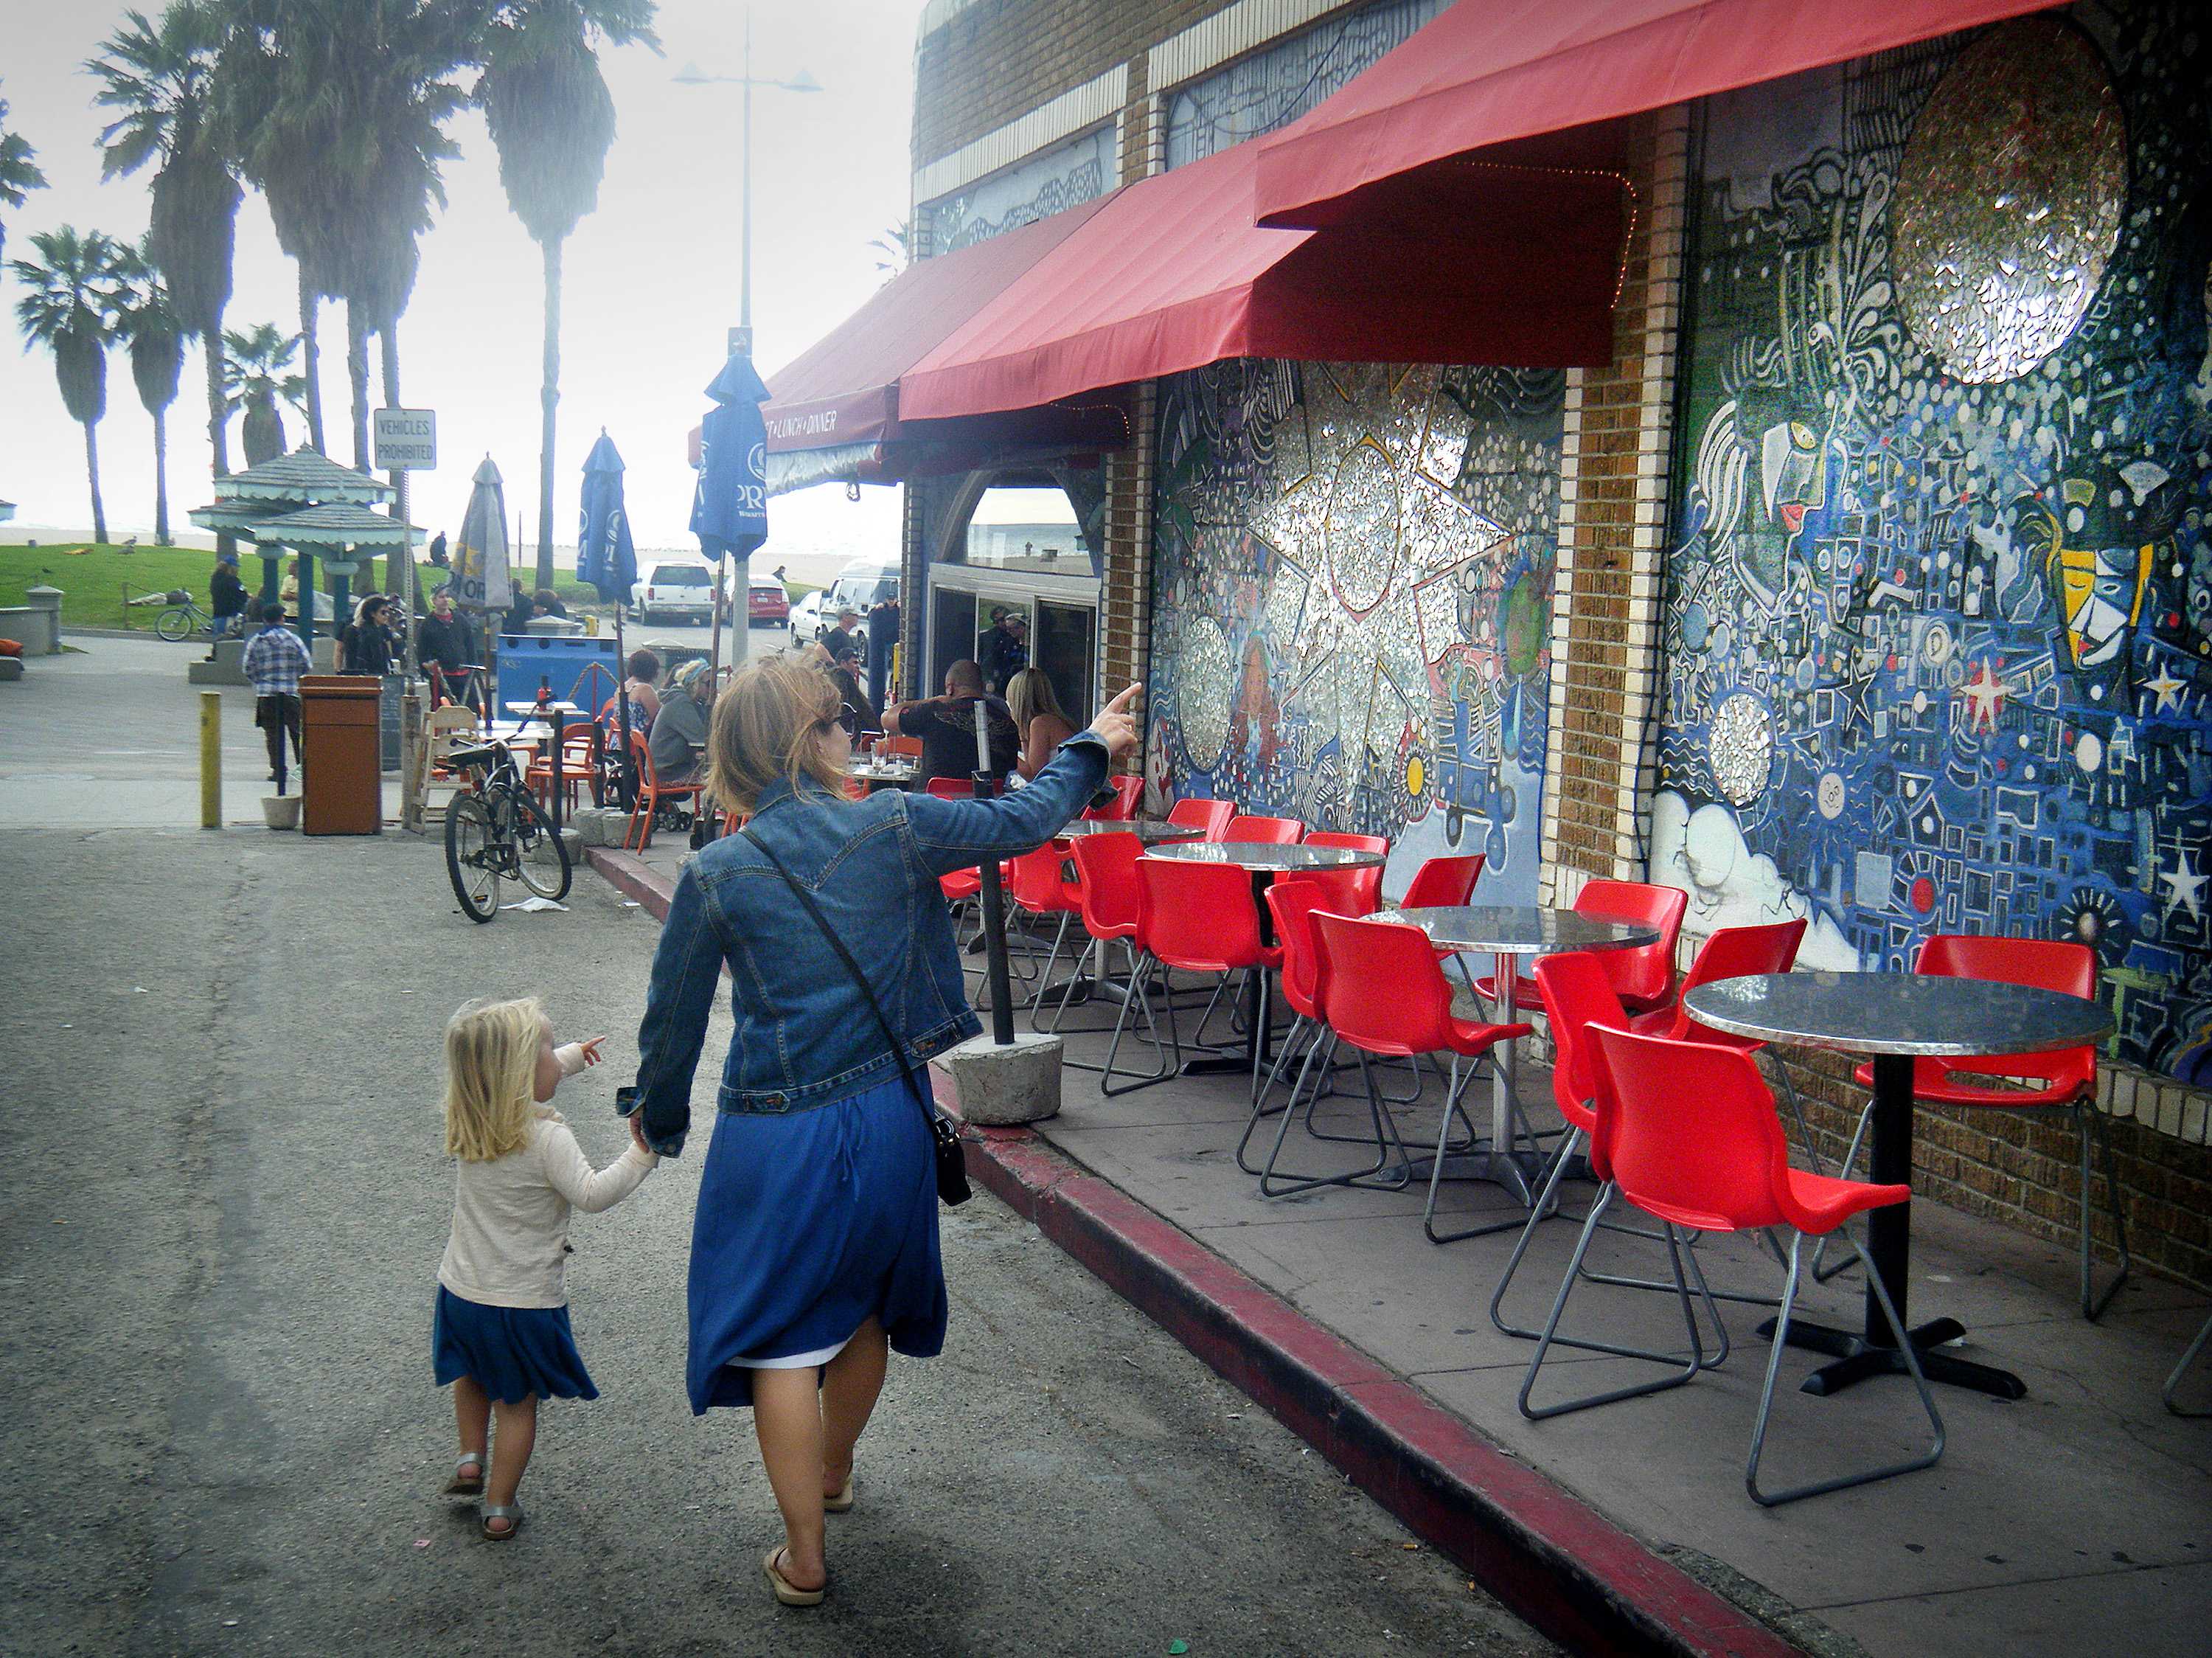 The small side streets in Venice offer a quieter buffer zone from the mayhem along the boardwalk and beach. (Chris Riemenschneider/Minneapolis Star Tribune/MCT)